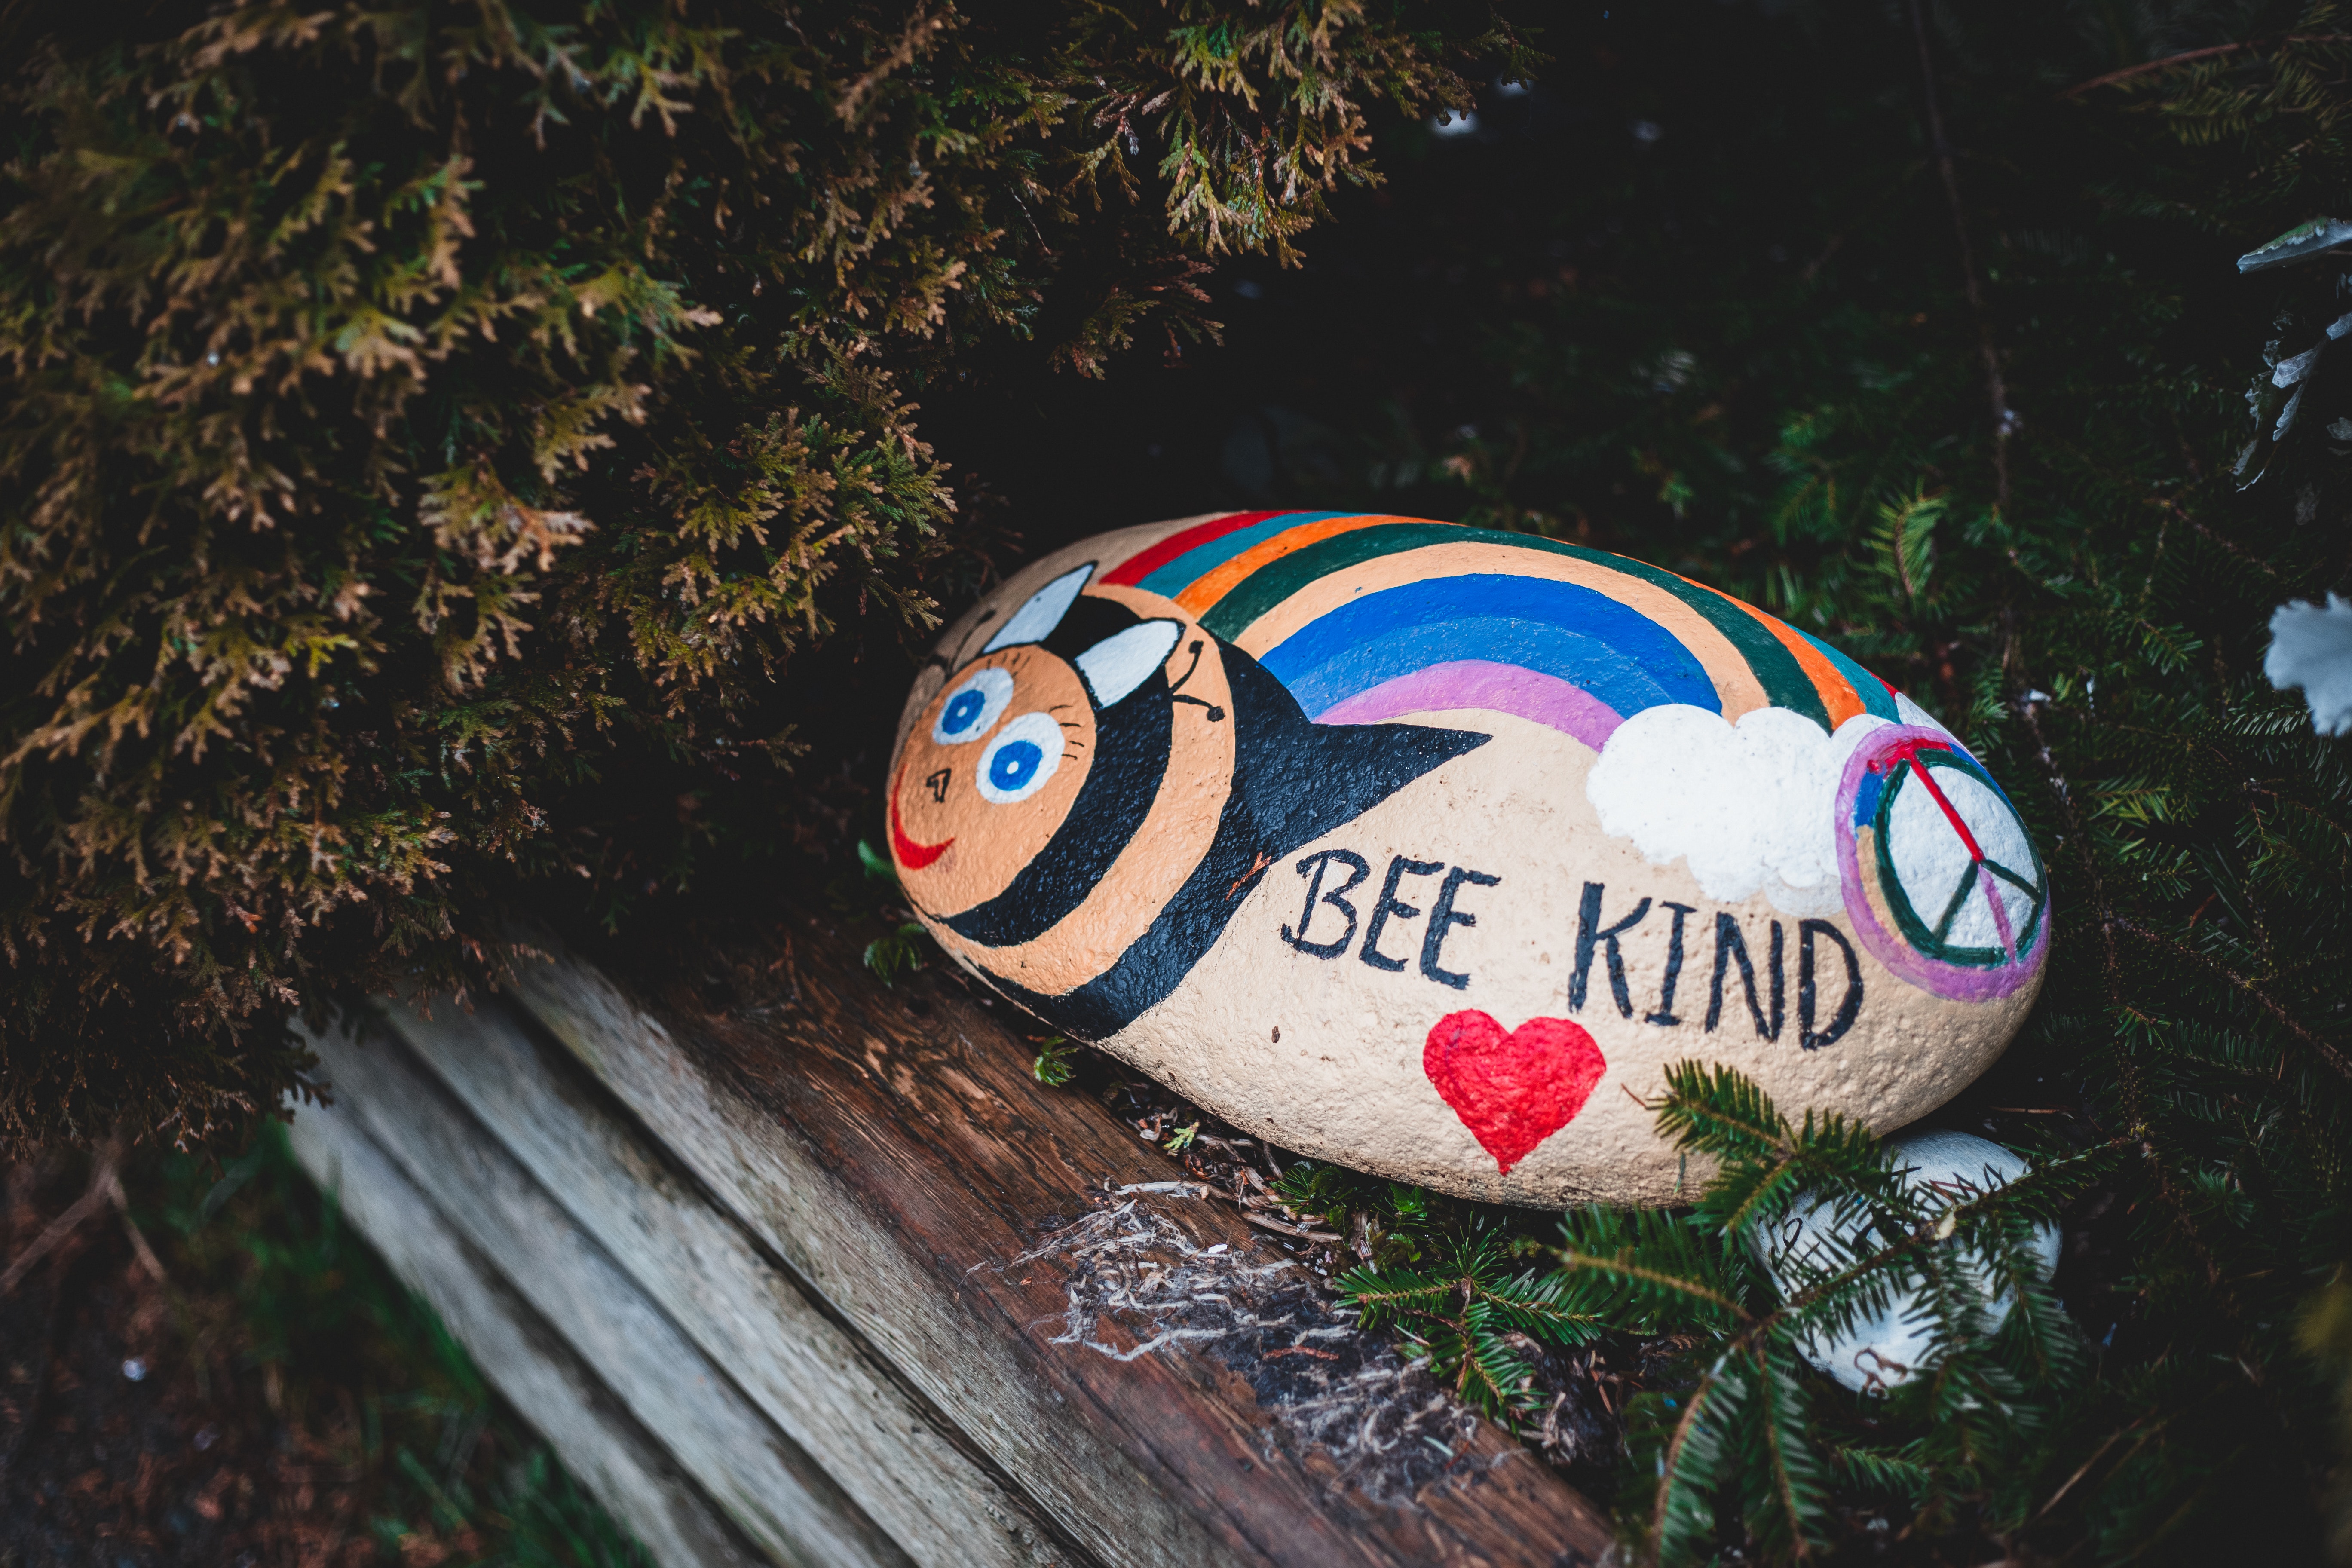 painted rock reading 'bee kind'